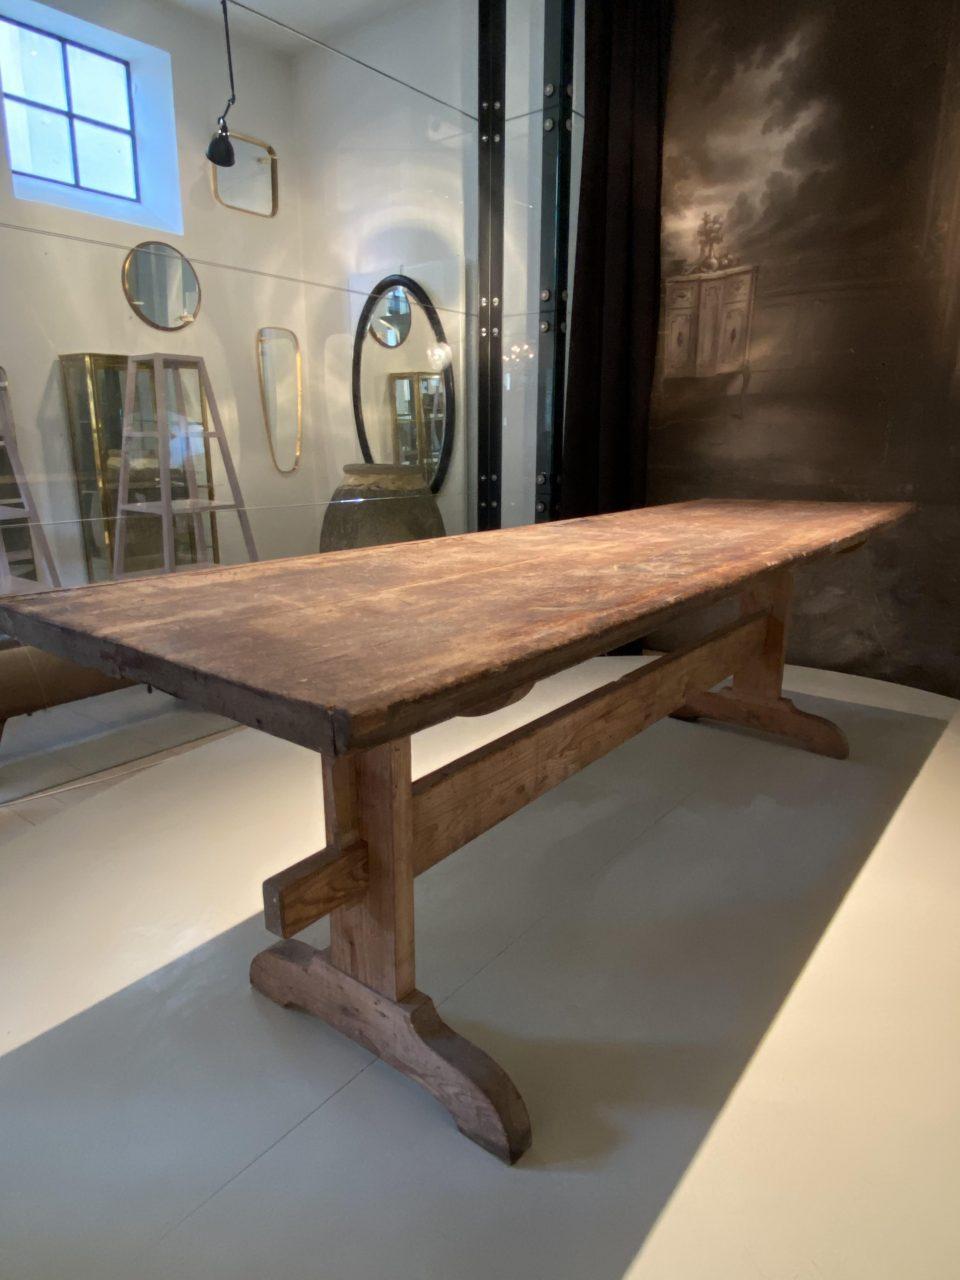 Wonderful antique French long table, in a solid oak tabletop and with a wooden base, late 19th century. Originally used as a work table by a jeweler, and has fantastic authentic patina as well as two charming tin repairs on the table surface.

An